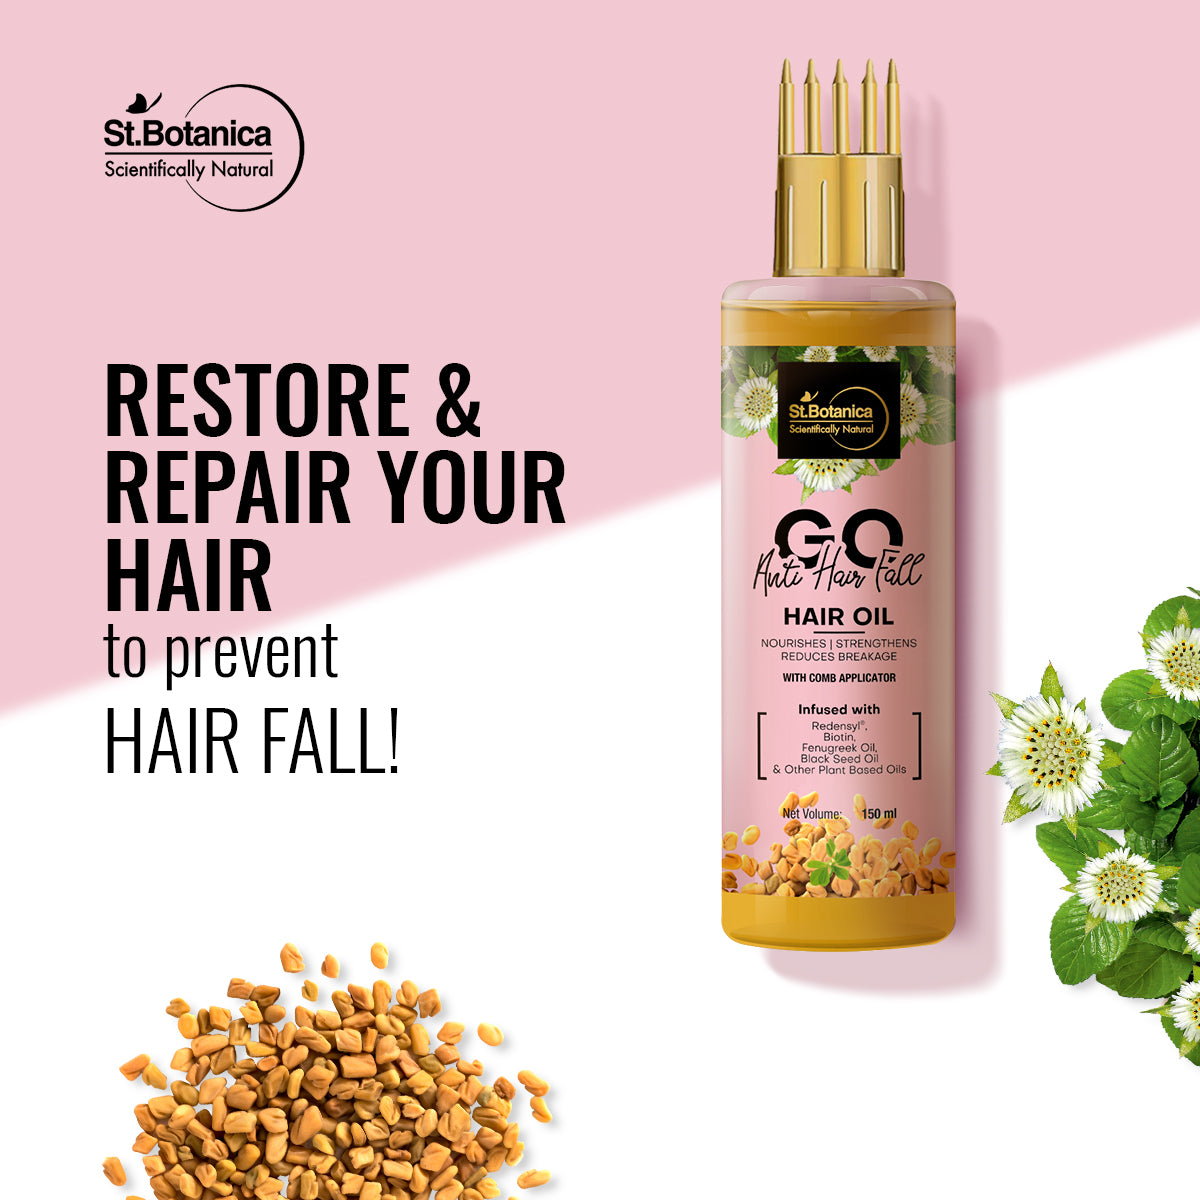 St.Botanica GO Mineral Anti Hair Fall Oil with Comb Applicator, Natural, RootBiotec 3%, Redensyl, Ginseng & Black Seed Oil & Other Botanicals, No Silicones, 150 ml